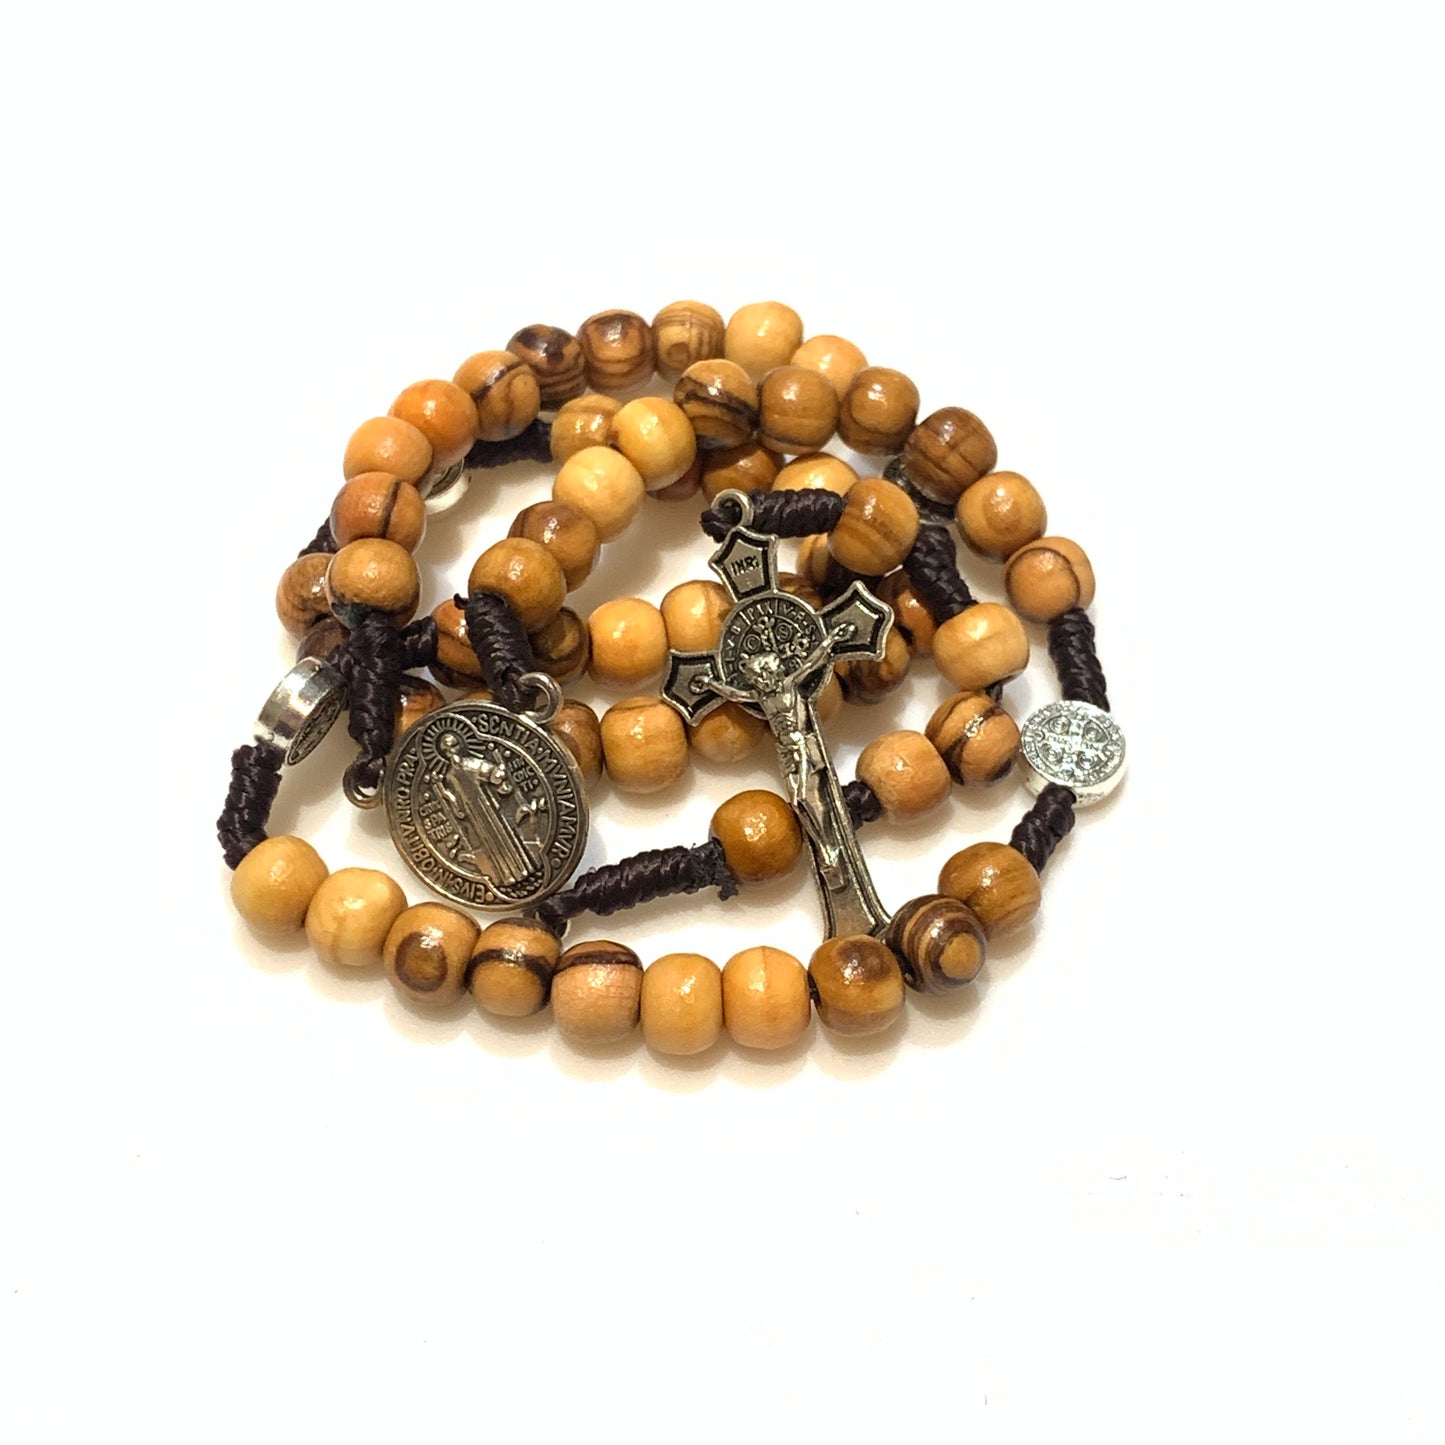 Olive Wood Rosary with St. Benedict Medals